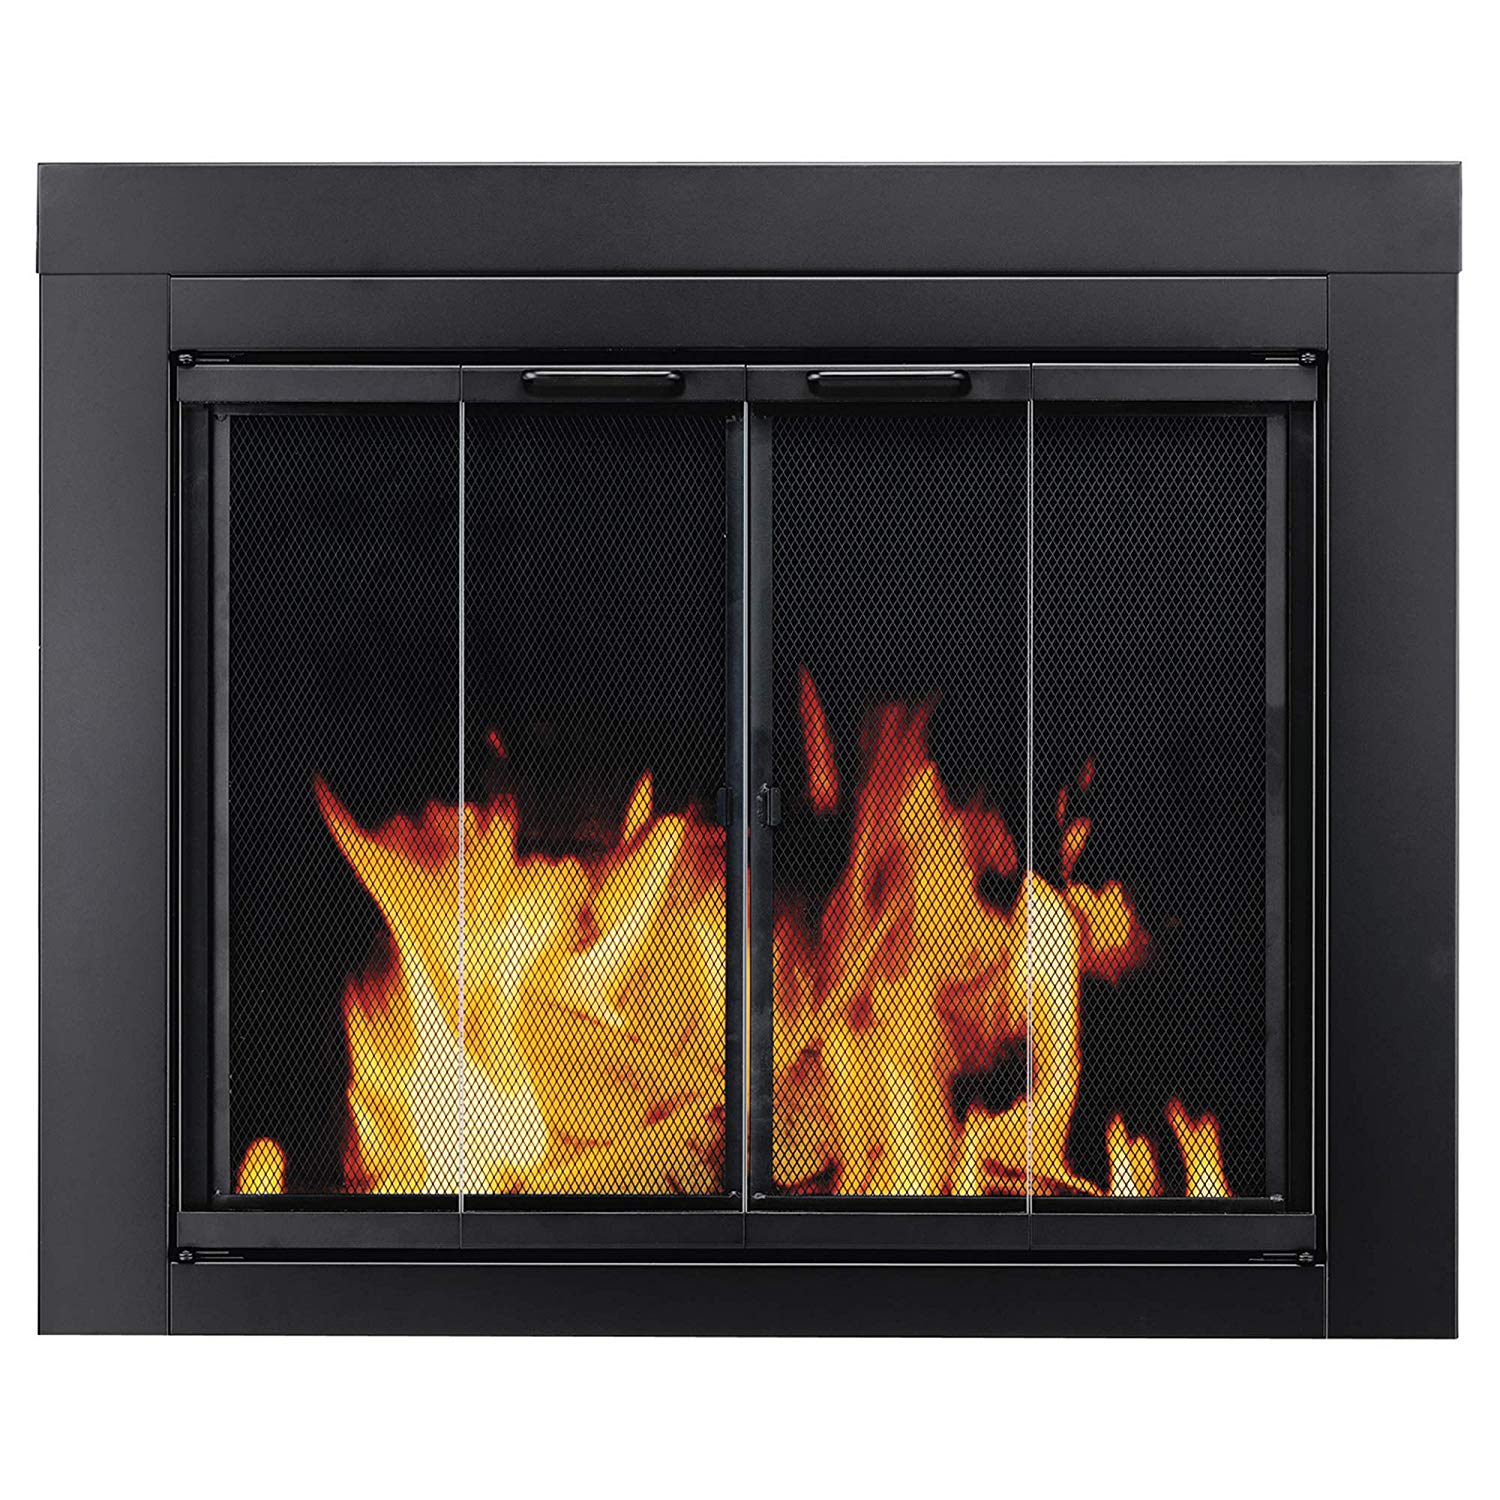 Fireplace Damper Open or Closed Awesome Pleasant Hearth at 1000 ascot Fireplace Glass Door Black Small